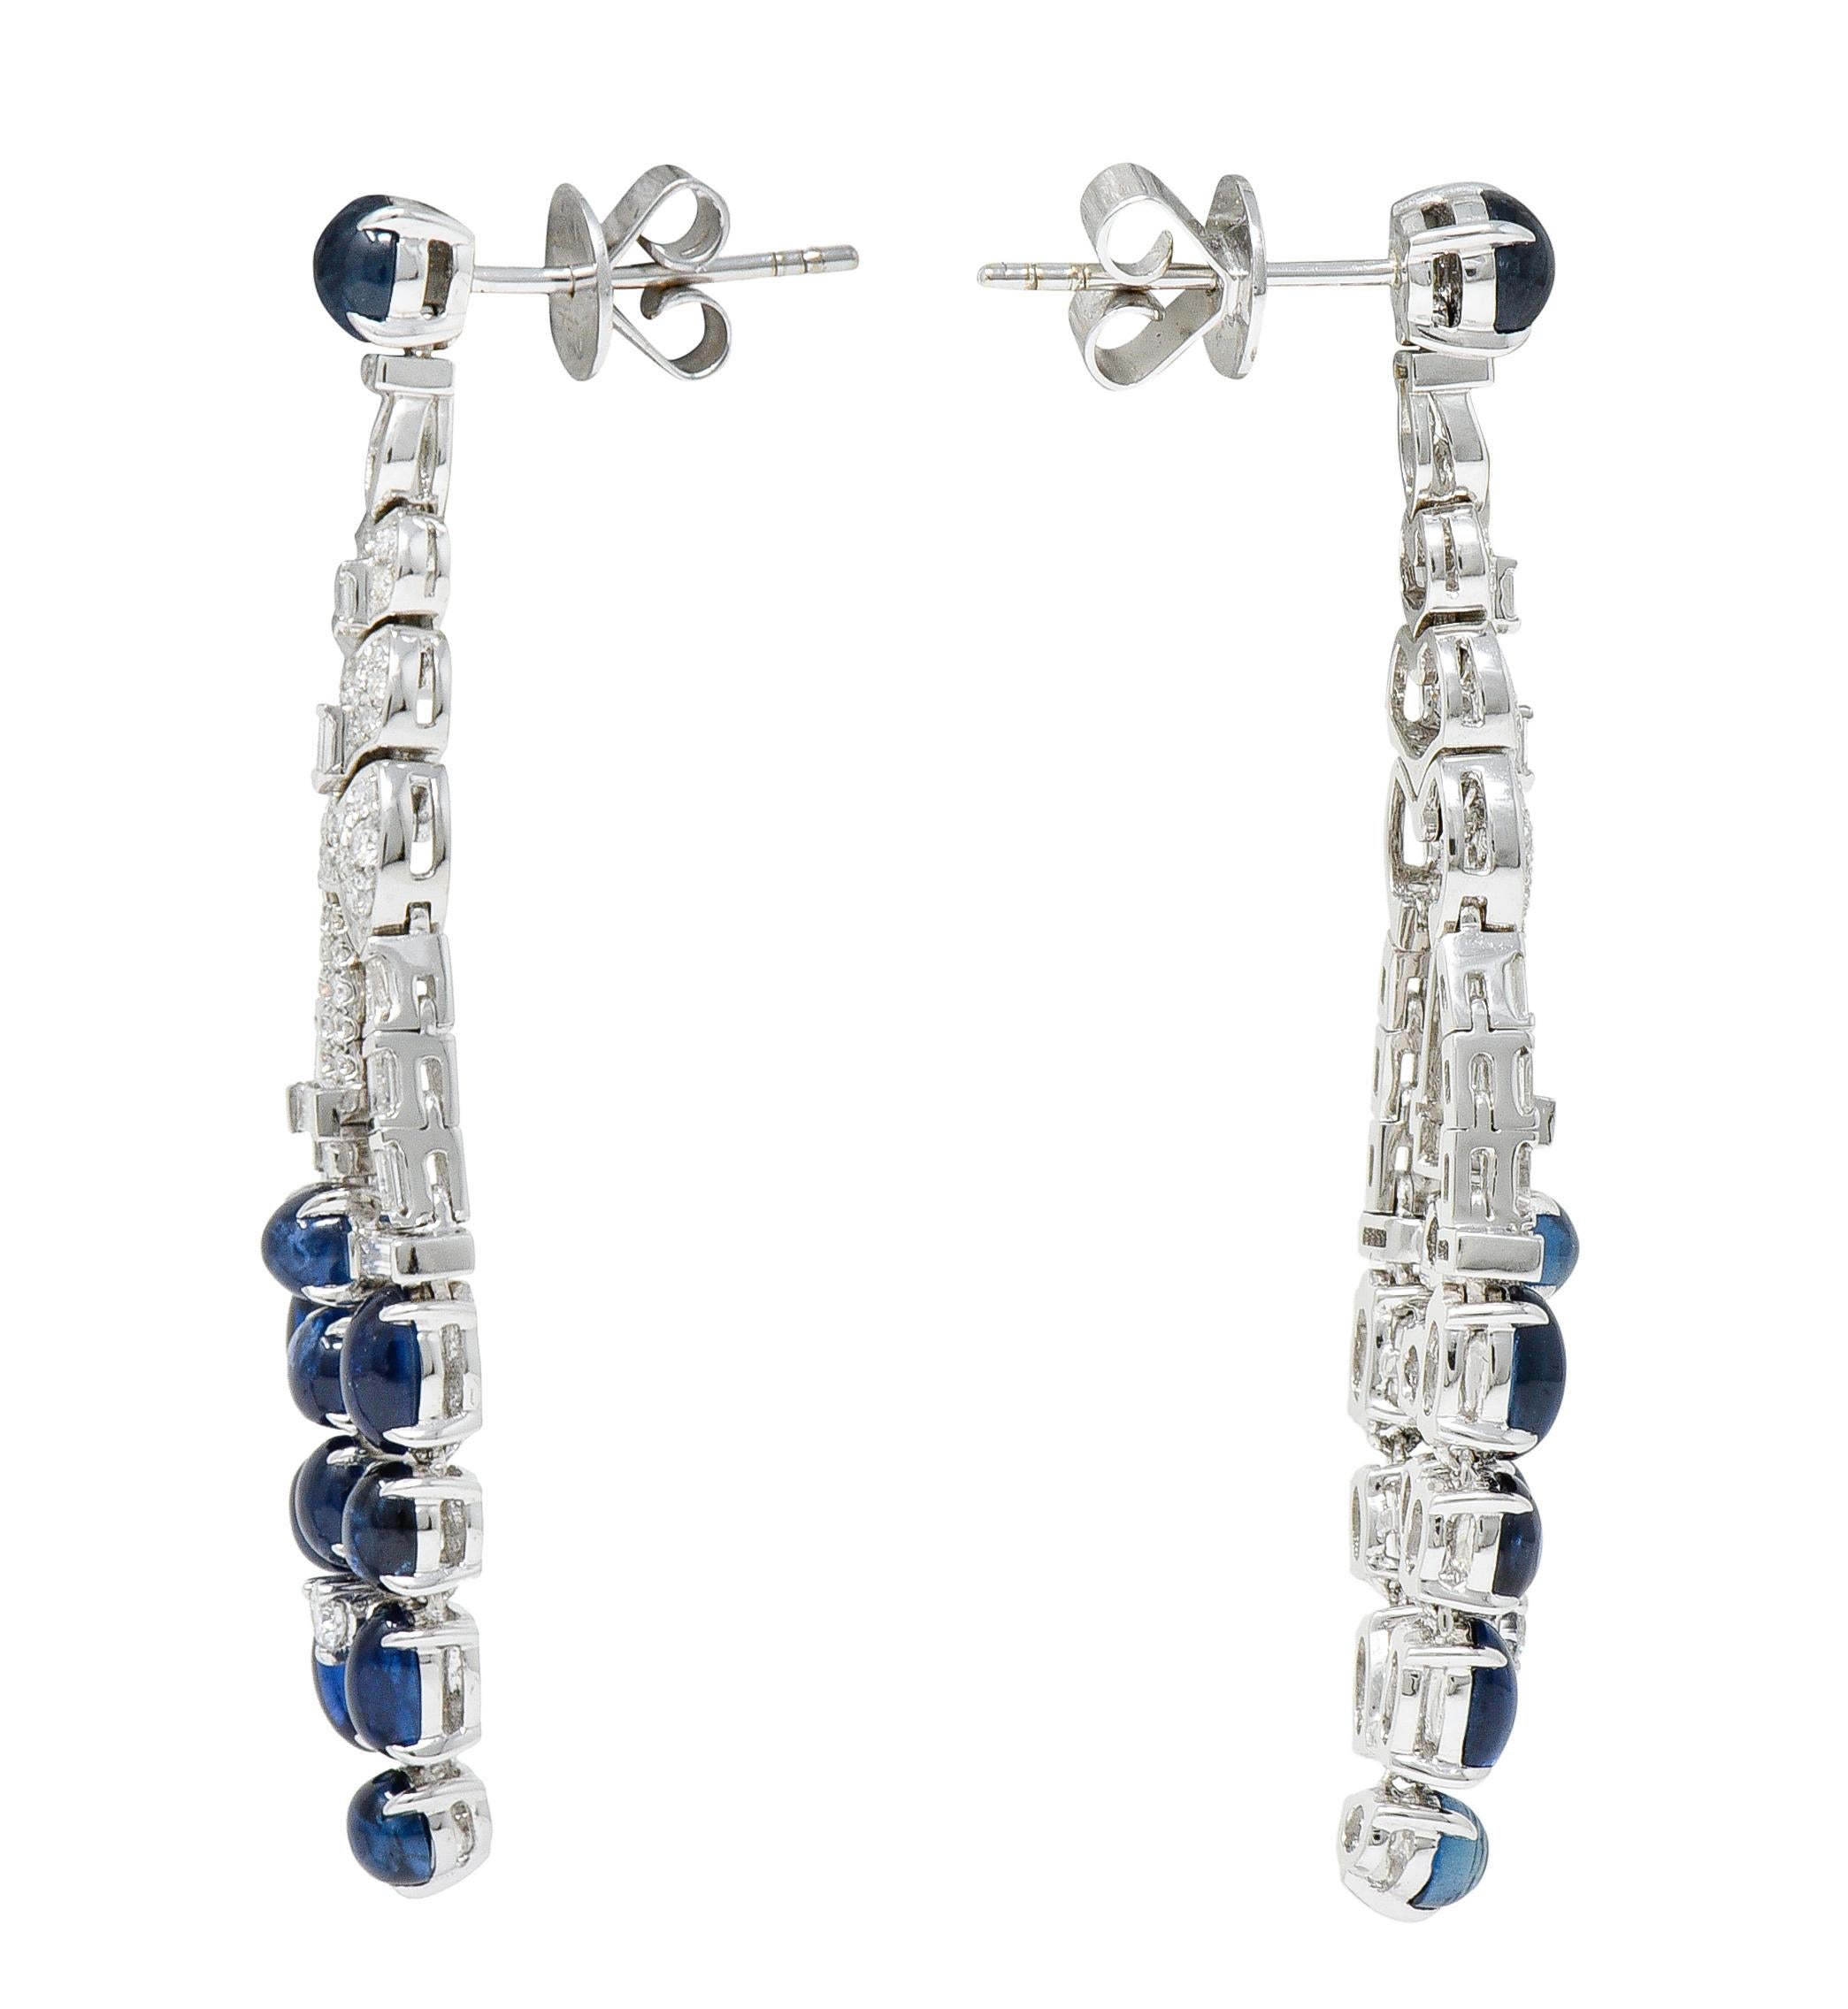 Drop earrings are designed with articulated white gold links - chandelier in style

With a round sapphire cabochon surmount and drop terminates as clustered sapphire cabochons

Very well matched in bright blue color and semi-transparent with natural